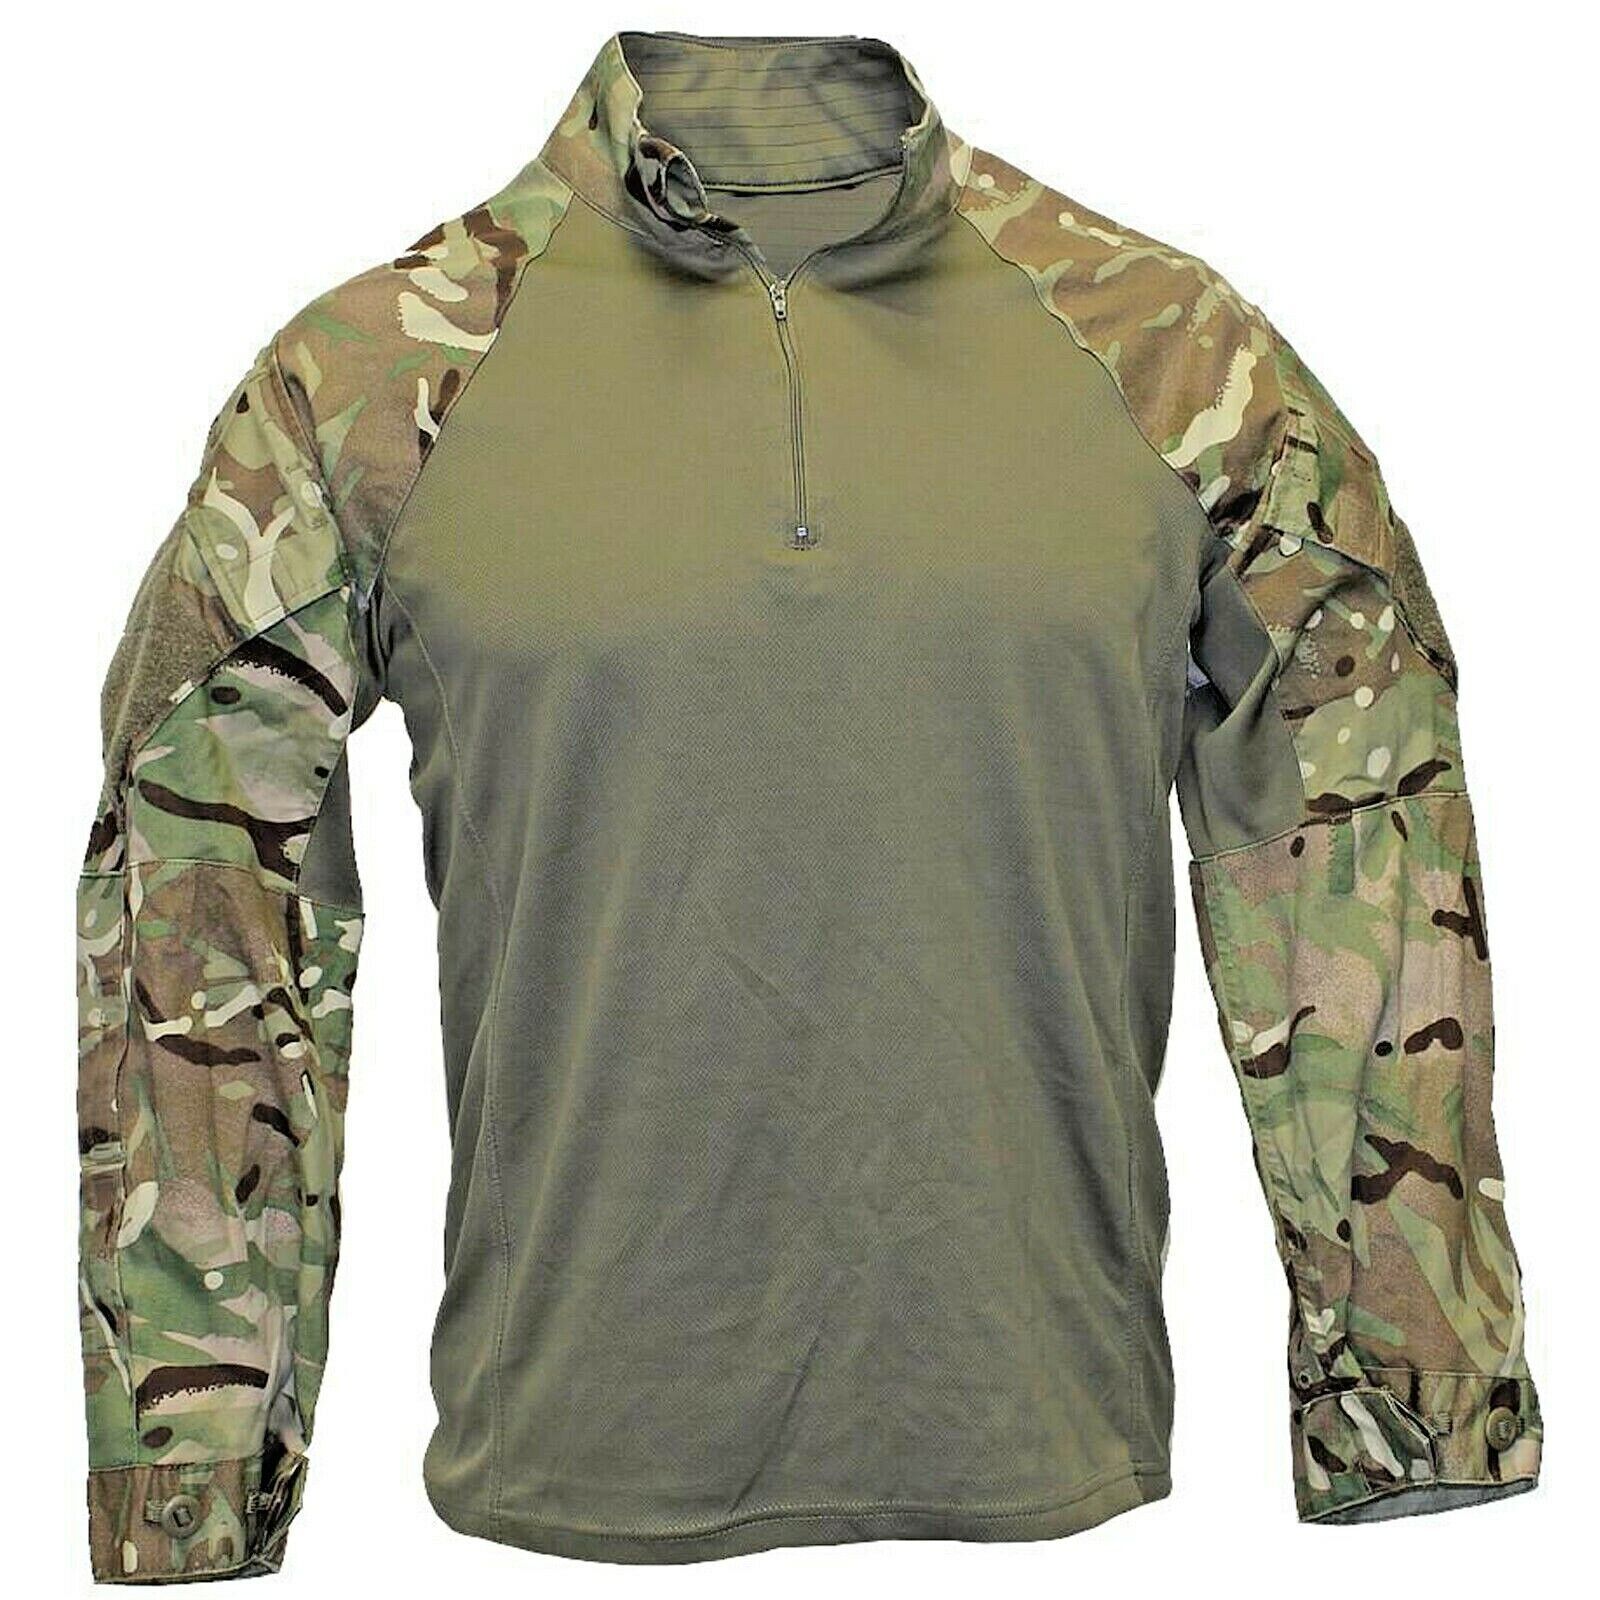 BRITISH ARMY MTP UBACS UNDER BODY ARMOUR SHIRT MILITARY ISSUE COMBAT AIRSOFT TOP